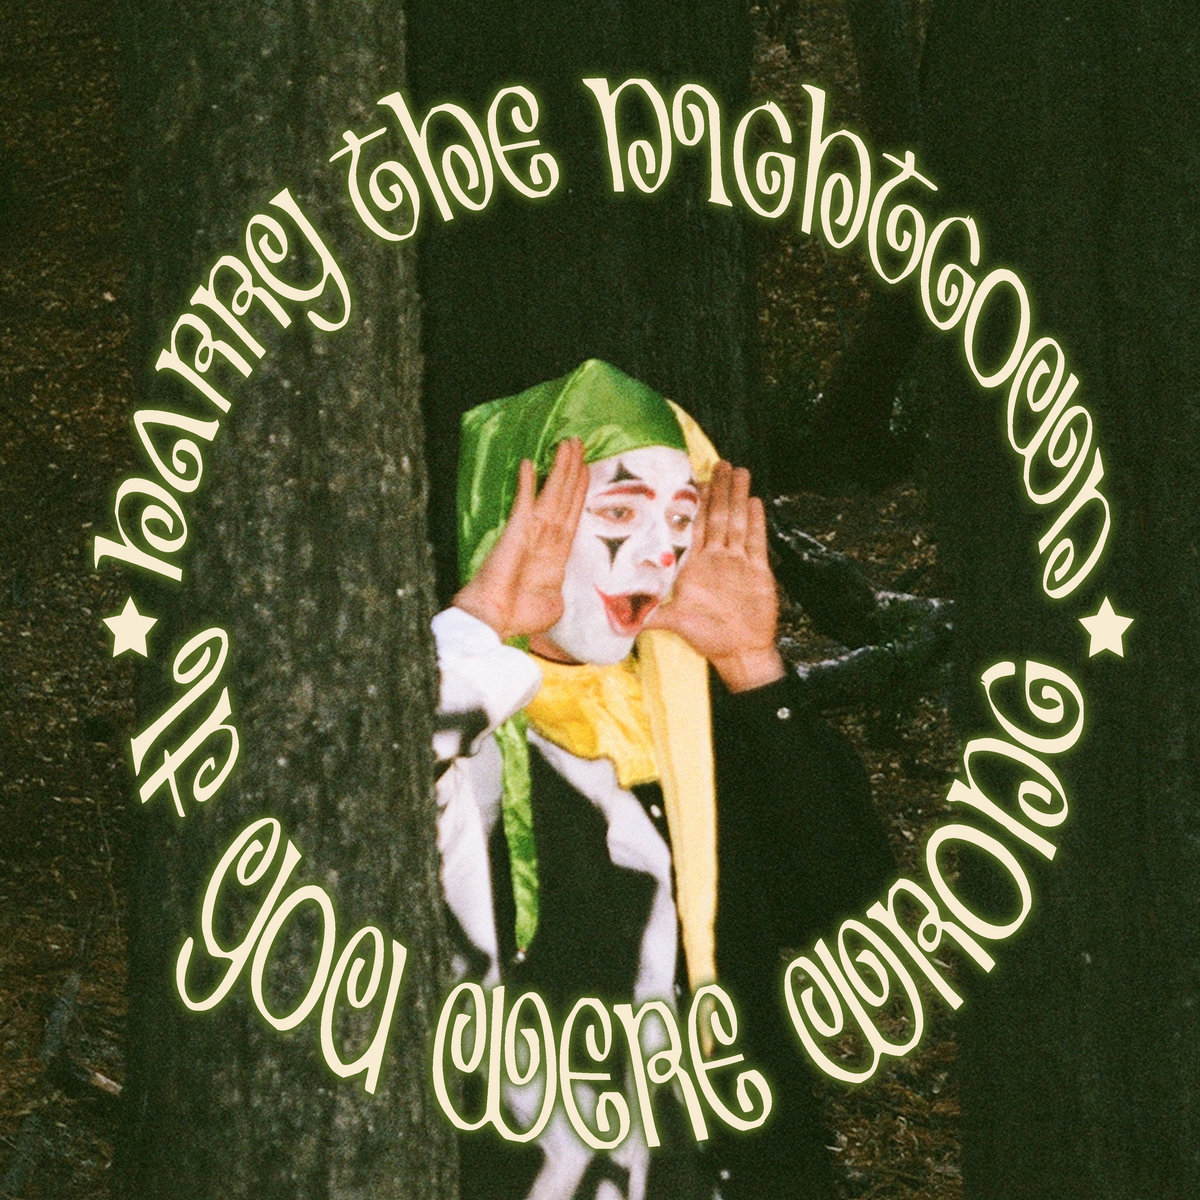 harry the nightgown if you were wrong album art - photo of a clown looking from behind a tree